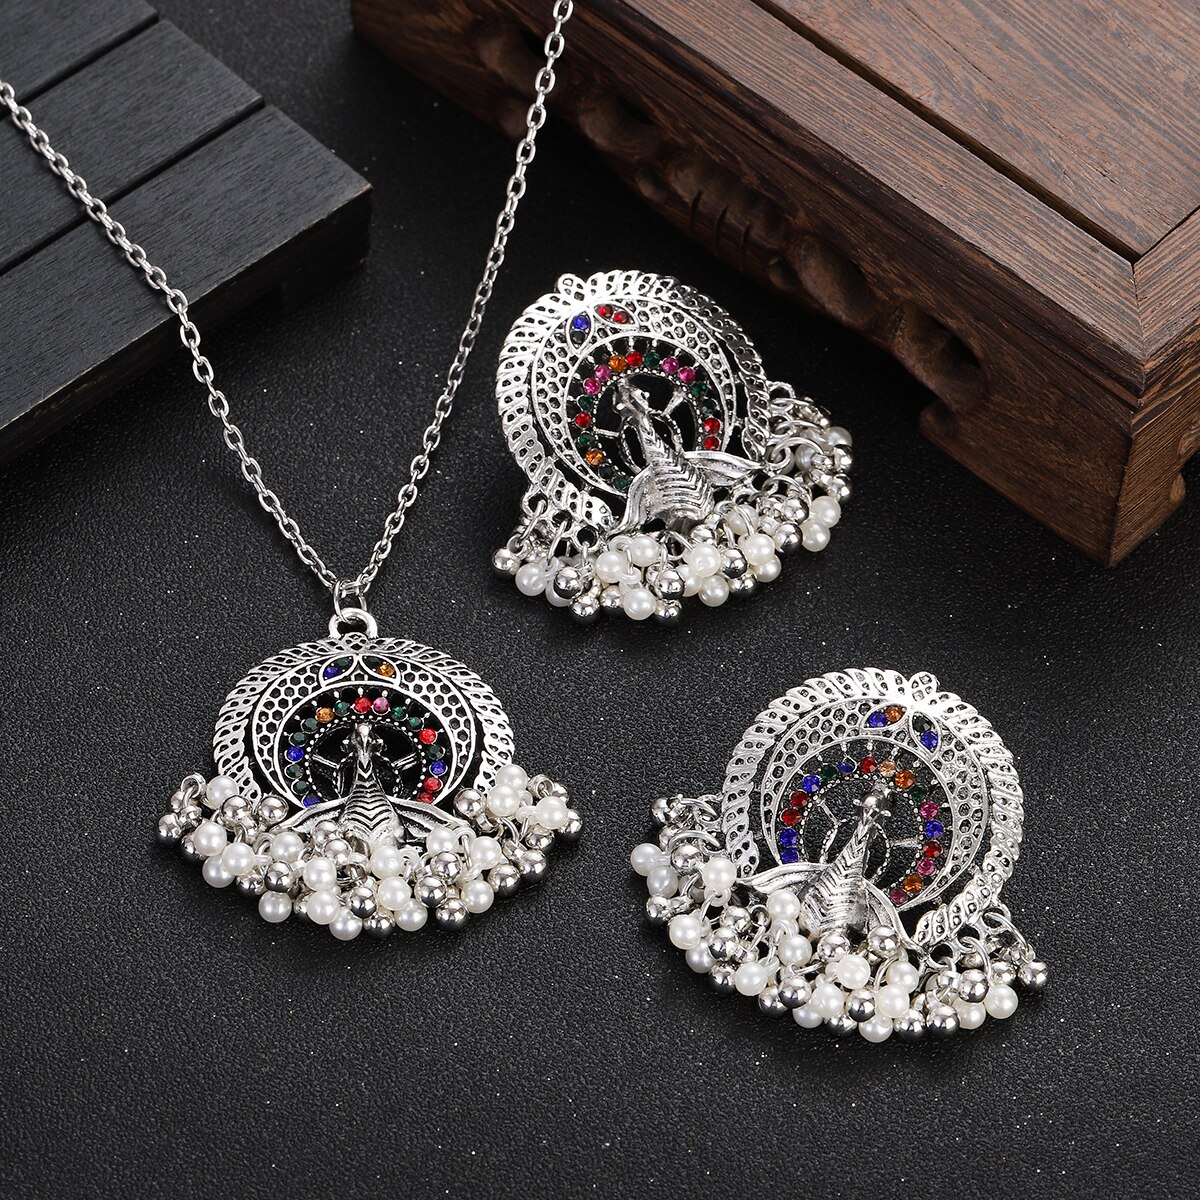 Vintage-Silver-Color-Jewelry-Sets-for-Women-Accessories-Ethnic-Geometric-Peacock-Crystal-Pendant-Nec-1005004941302824-8